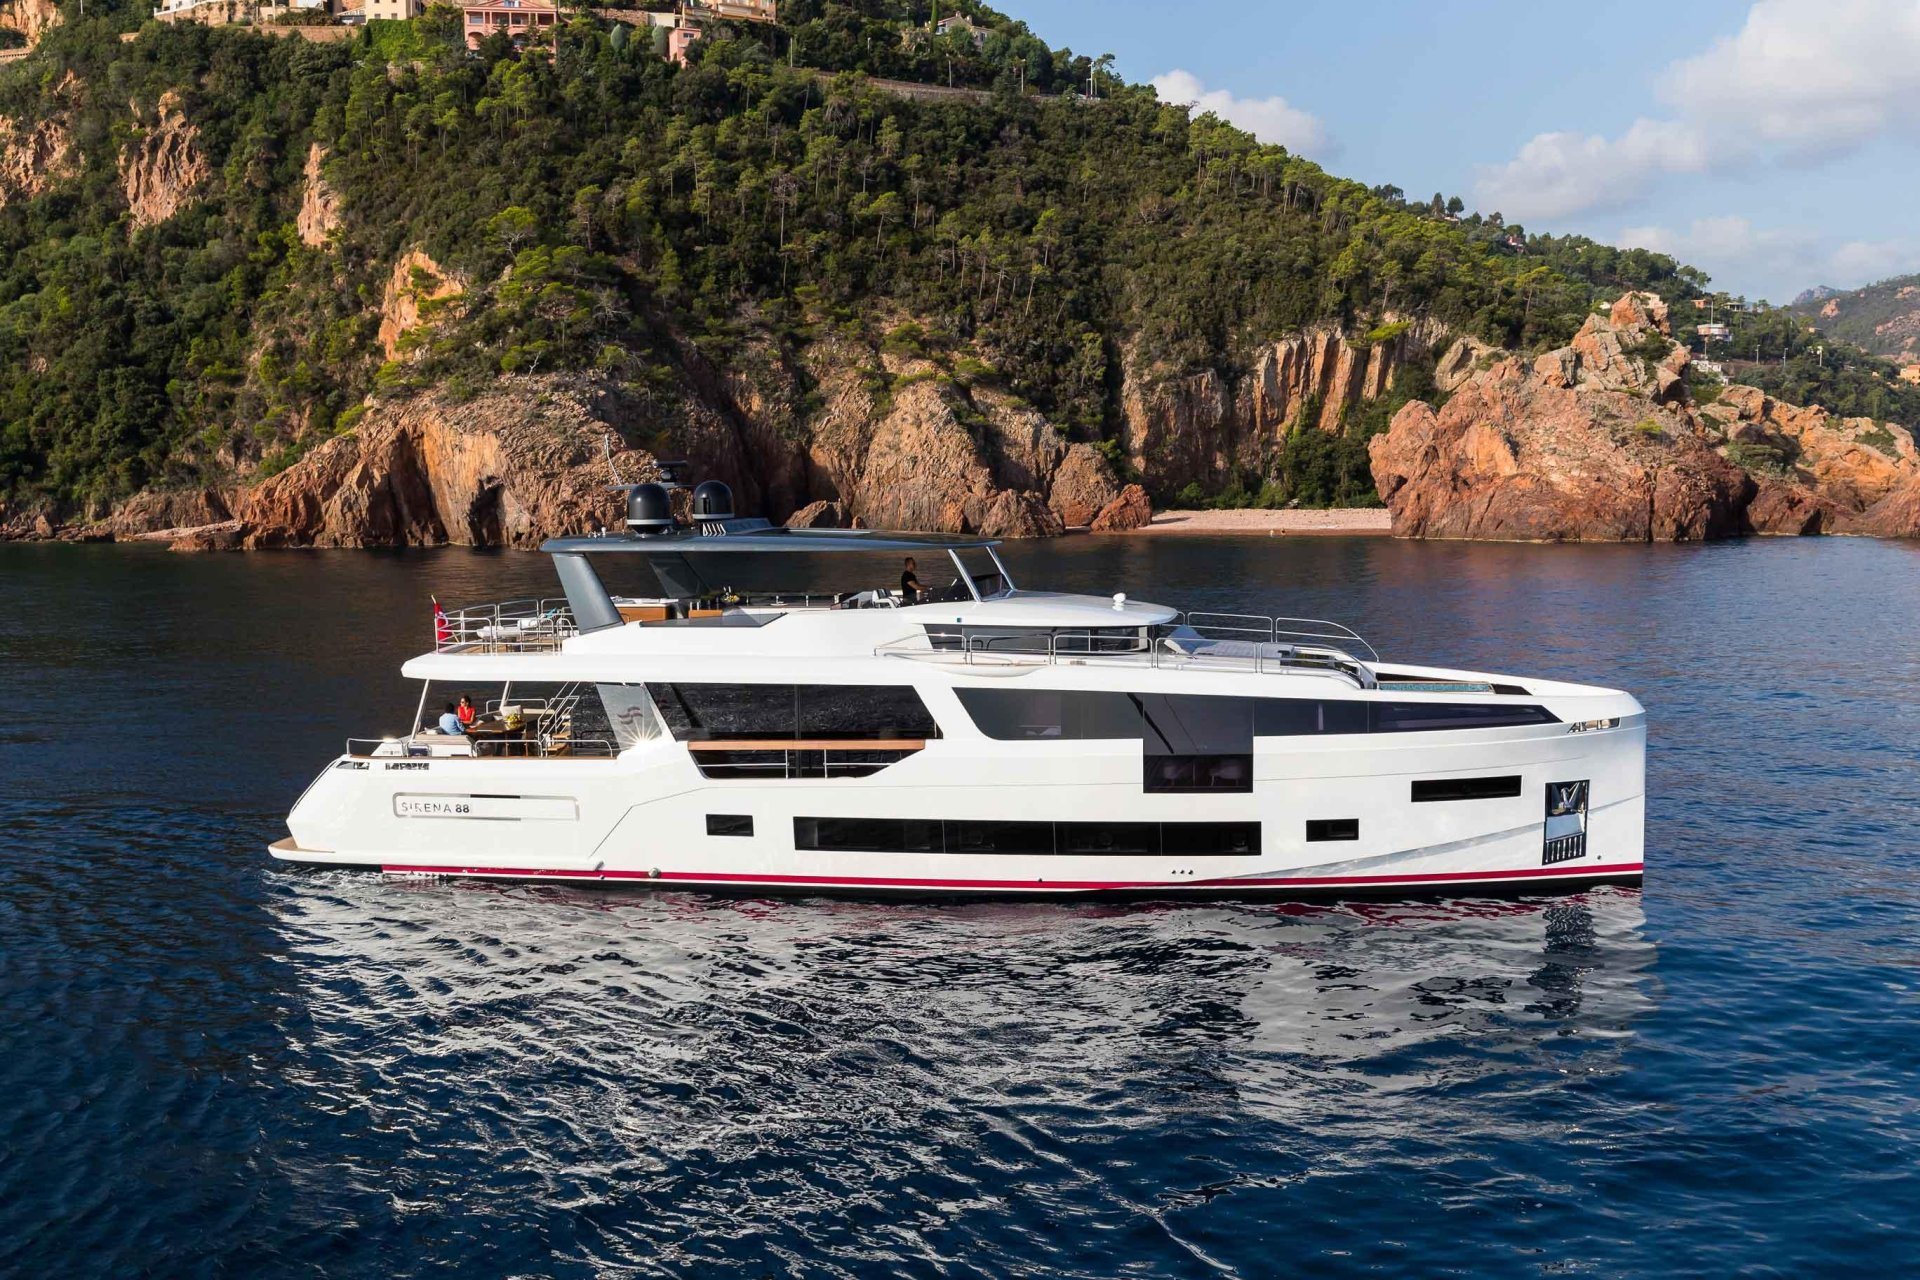 360 VR Virtual Tours of the Sirena 88